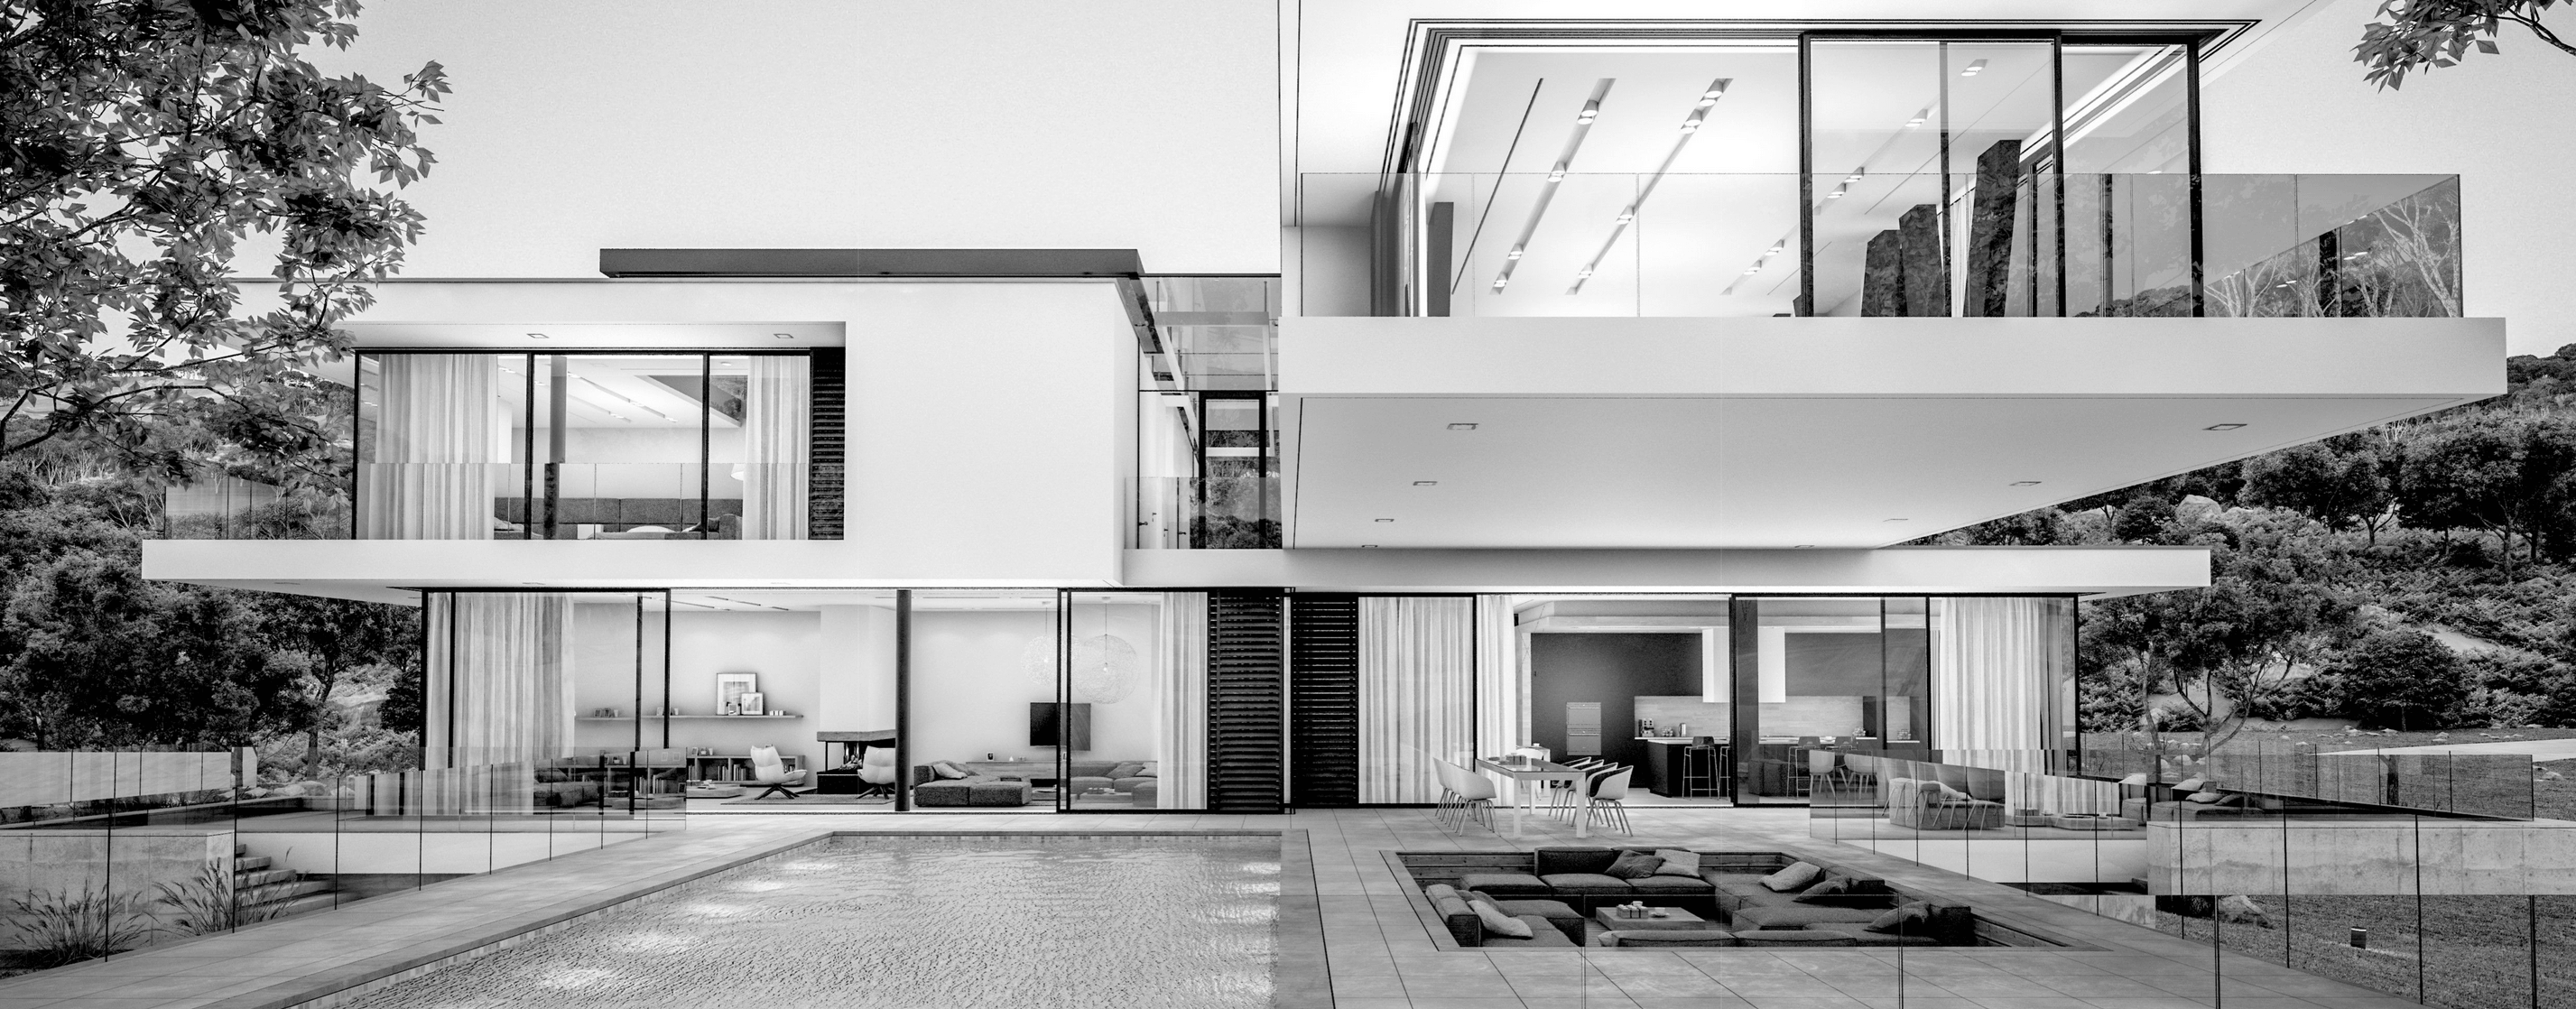 Architectural Home blk and white